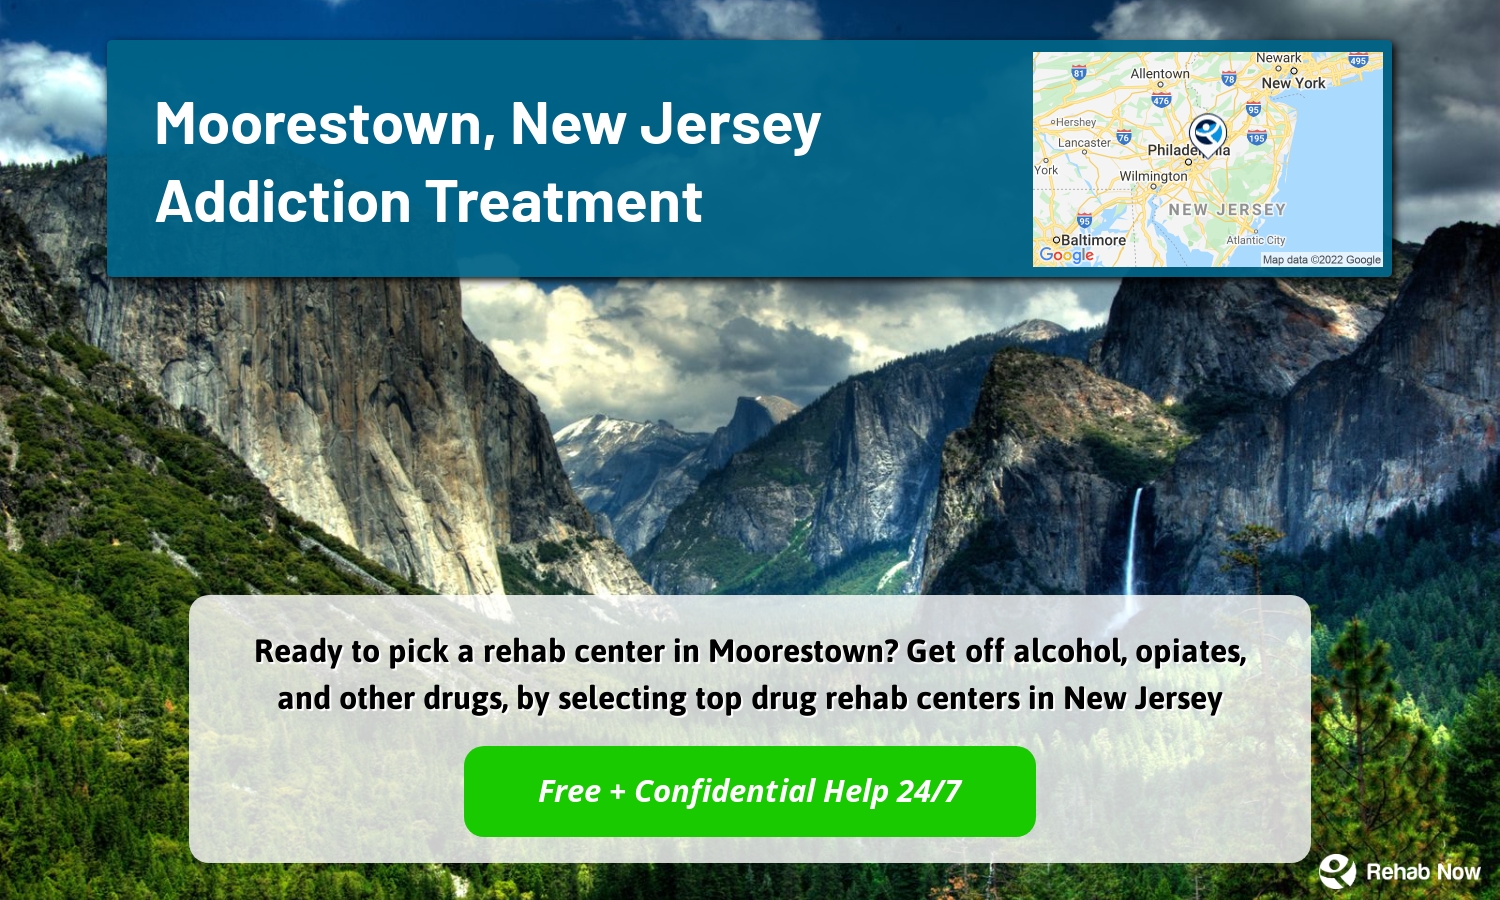 Ready to pick a rehab center in Moorestown? Get off alcohol, opiates, and other drugs, by selecting top drug rehab centers in New Jersey